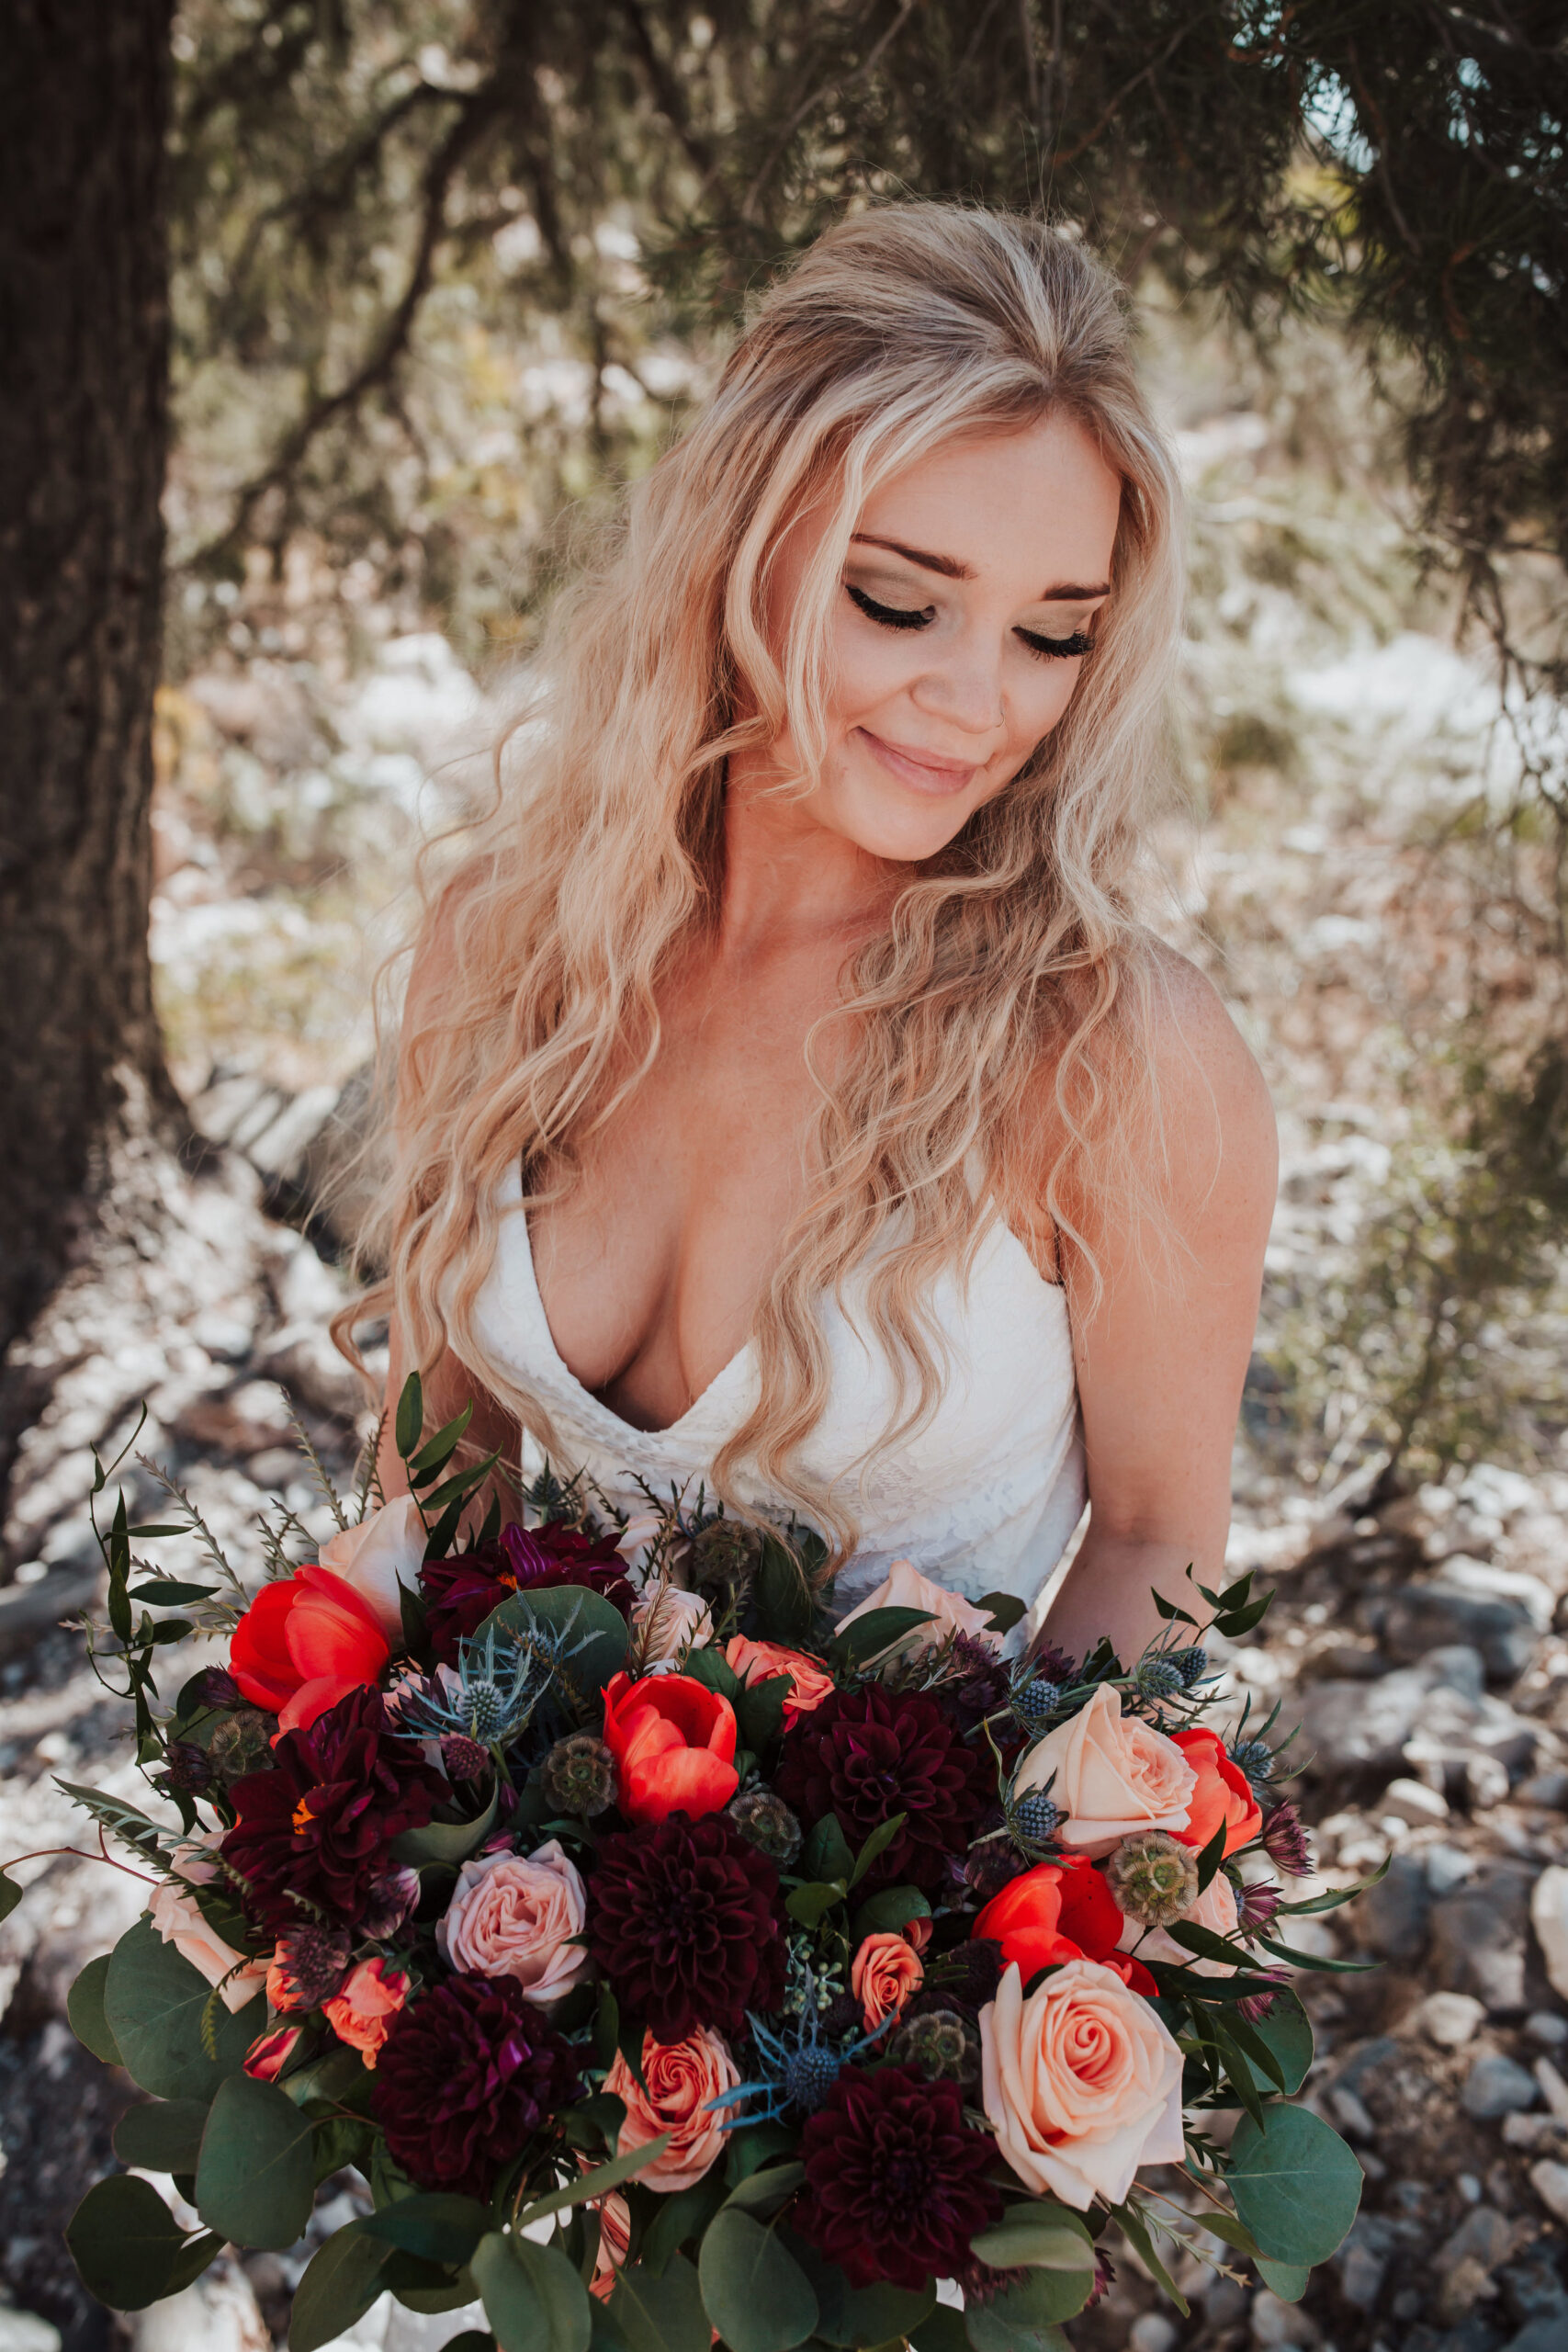 Rustic Bloom Photography | Bridal Bouquet Inspiration